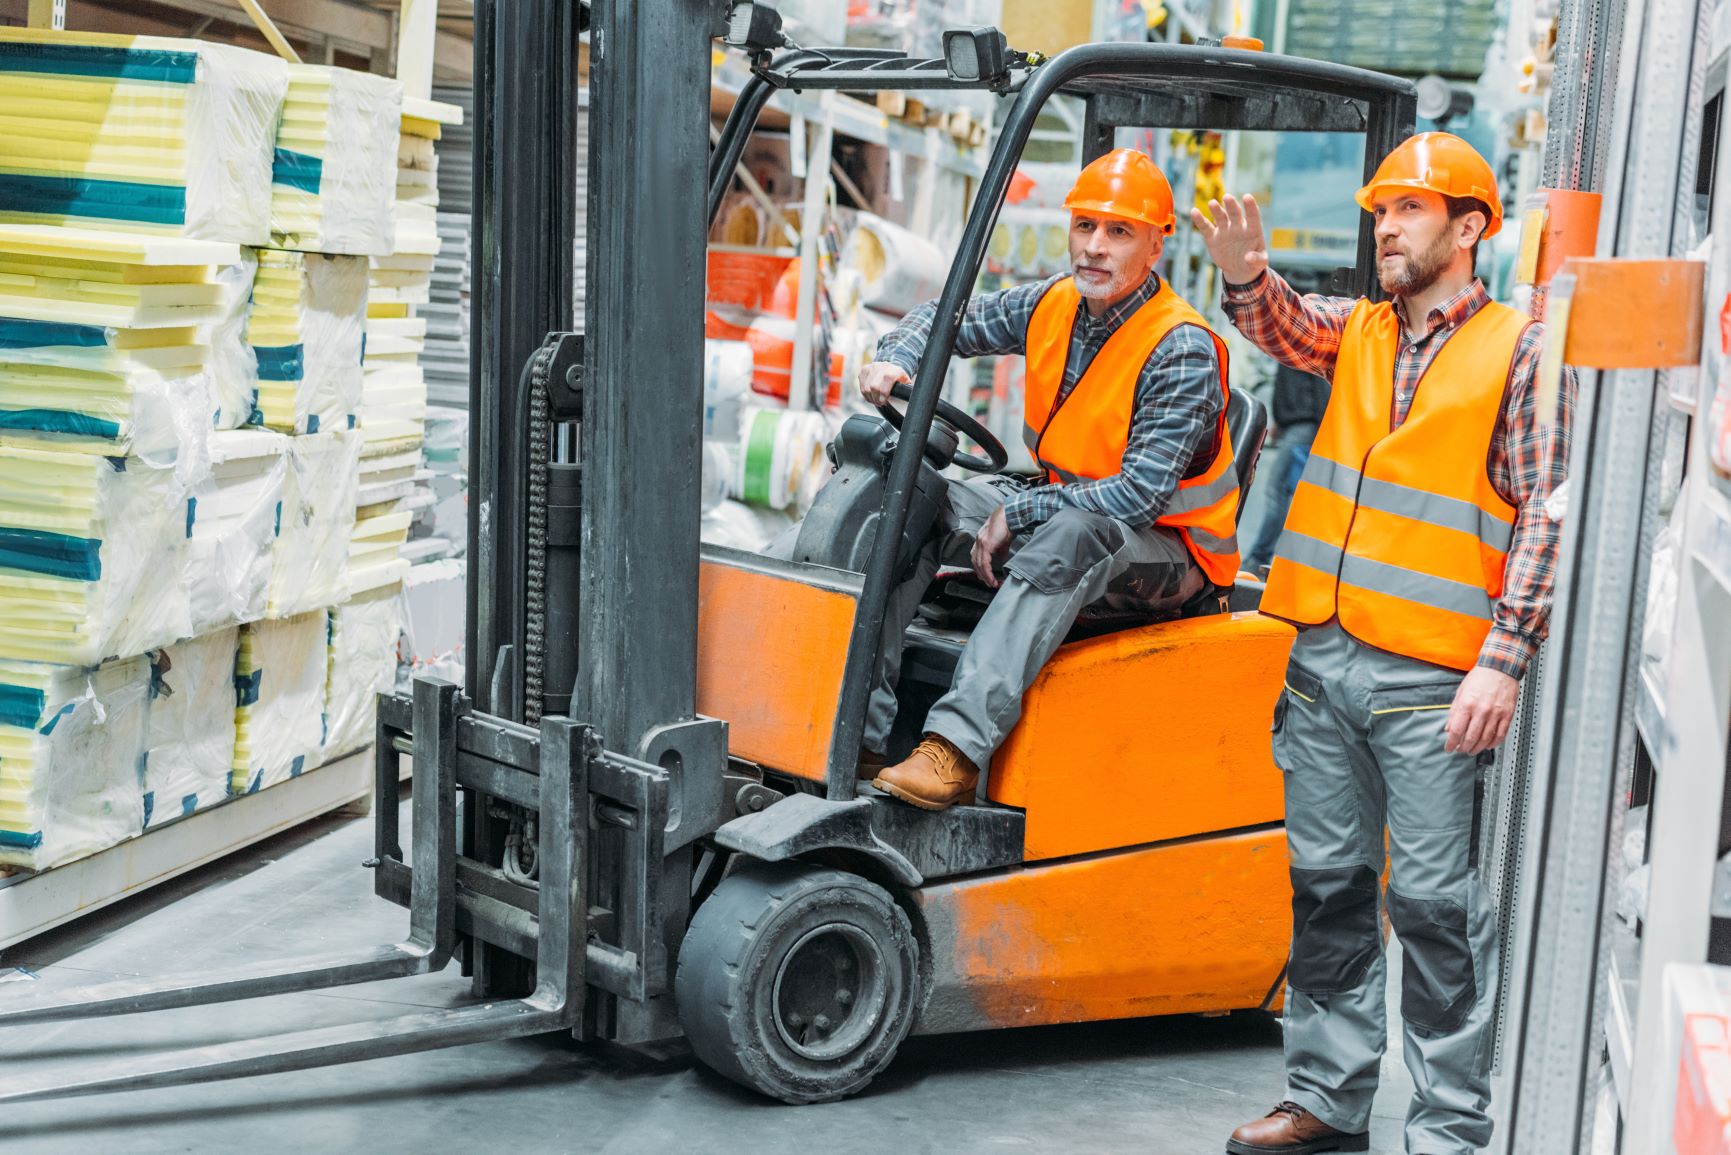 Forklift Pre-start Checklist - The safety, wellbeing & rehab experts